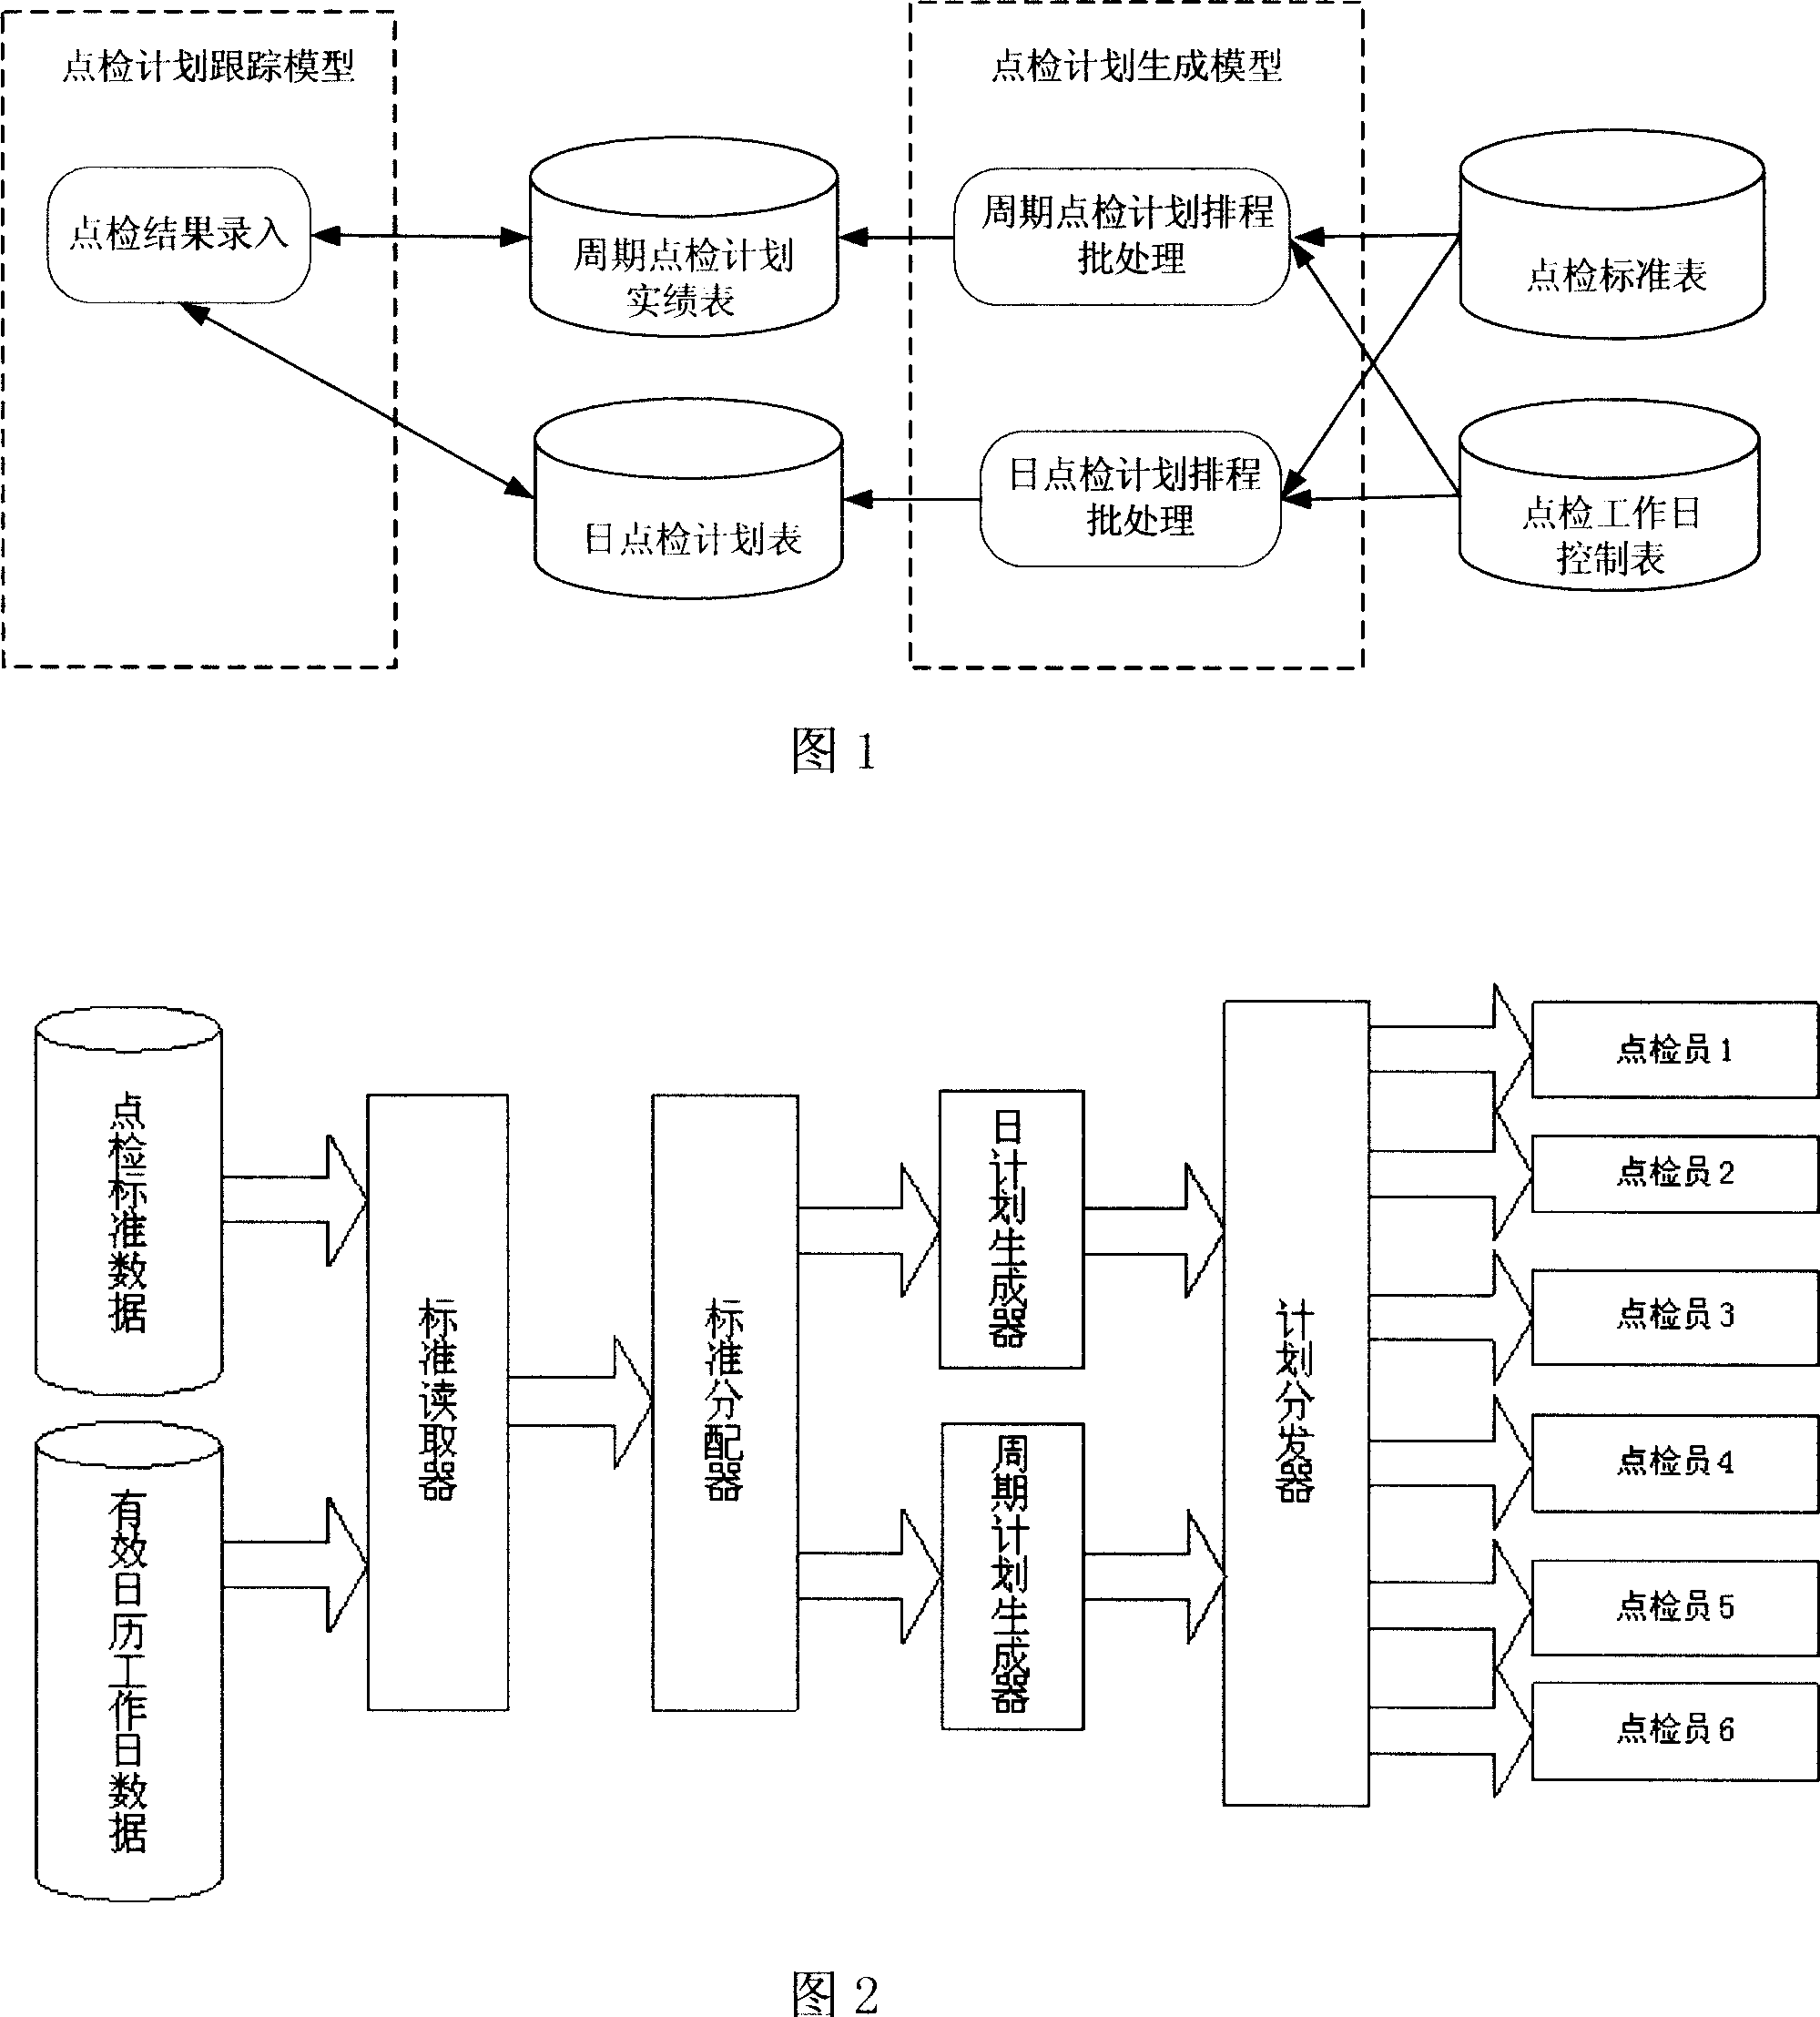 Spot-checking plan scheduling control device